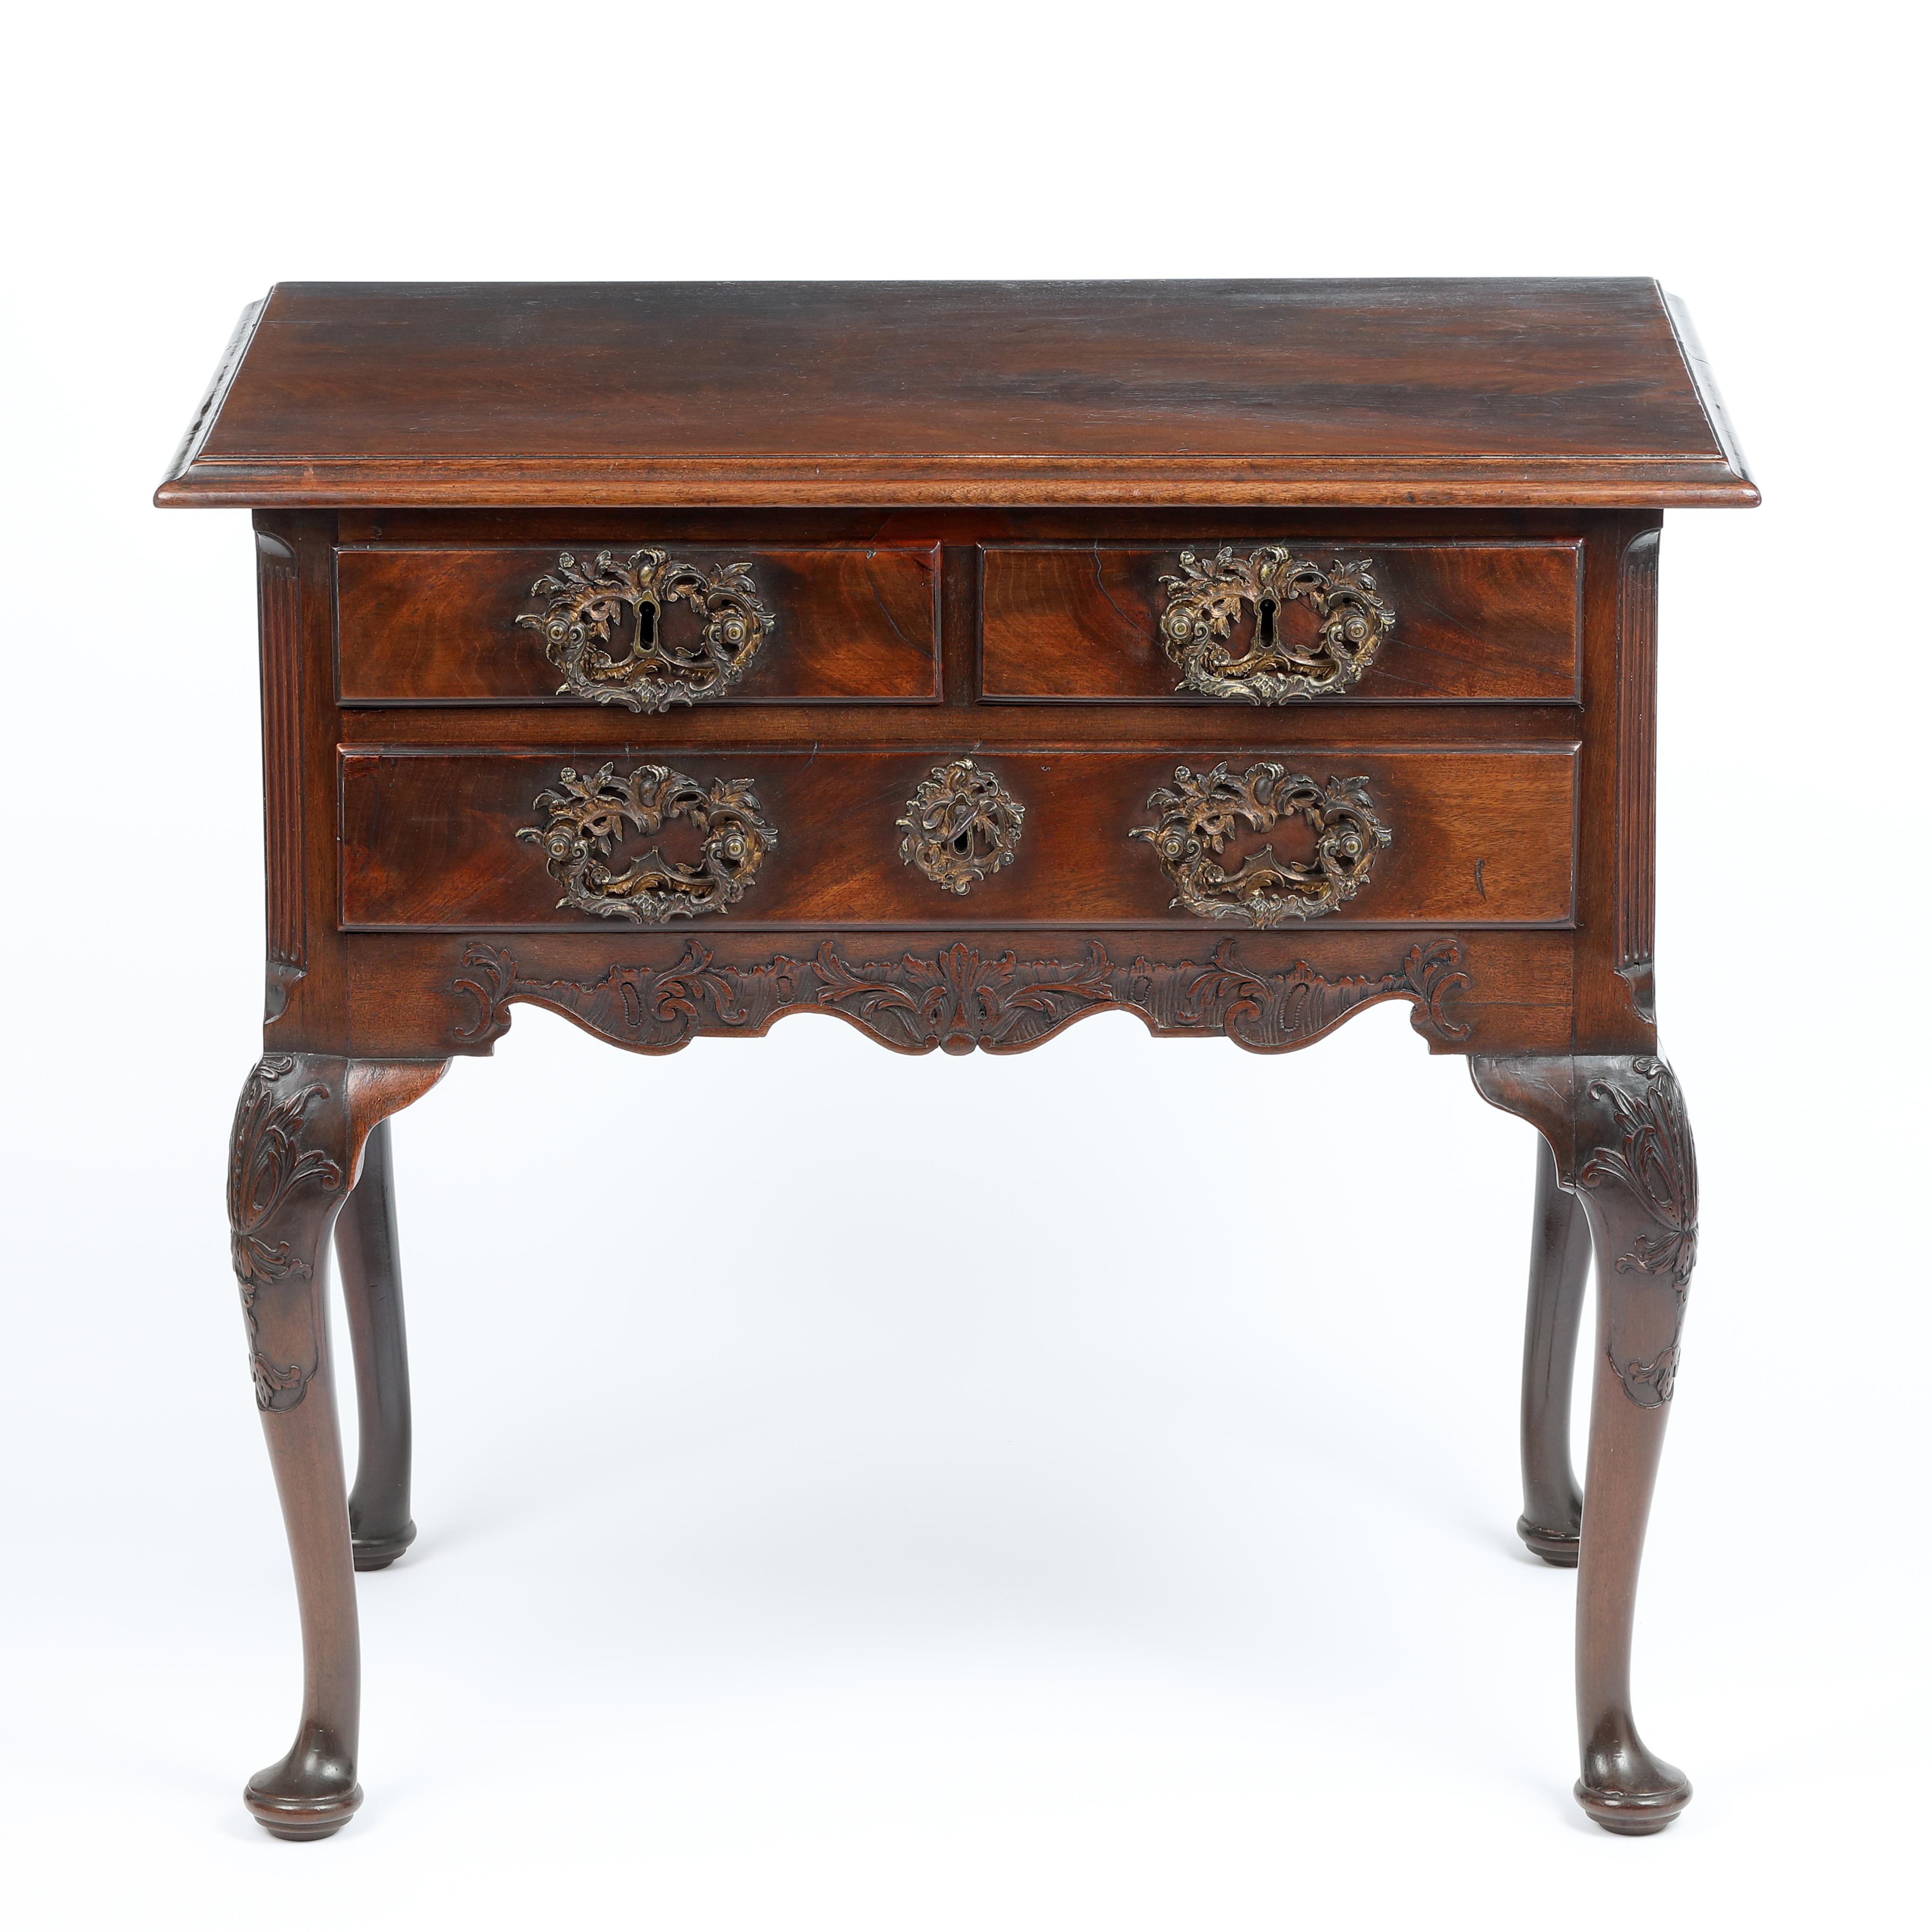 An outstanding and superior quality mid 18th century magoany lowboy of delightful small proportions and perfectly balanced.
This spectaular piece with crisply carved decoration represents the height of English Georgian craftsmanship and would have